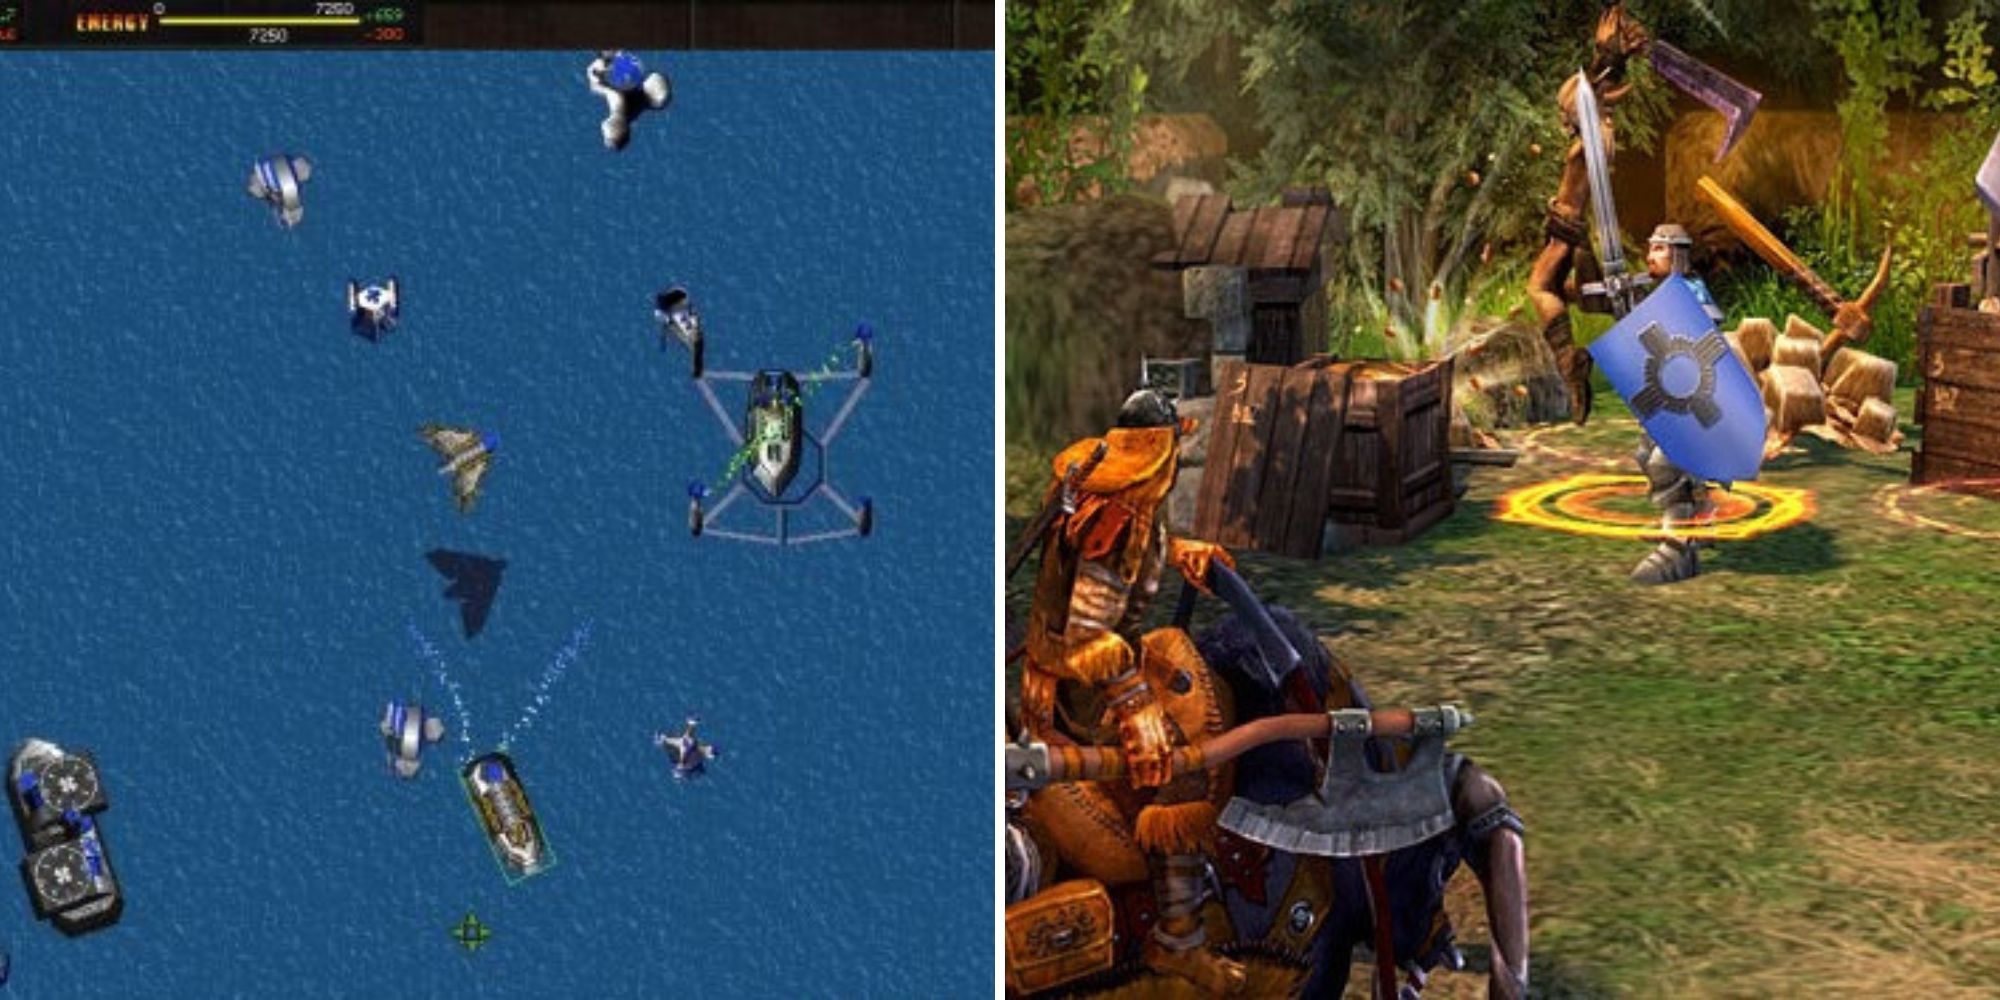 screenshots of combat from the strategy games Total Annihilation and Heroes of Might & Magic 5: Tribes of the East